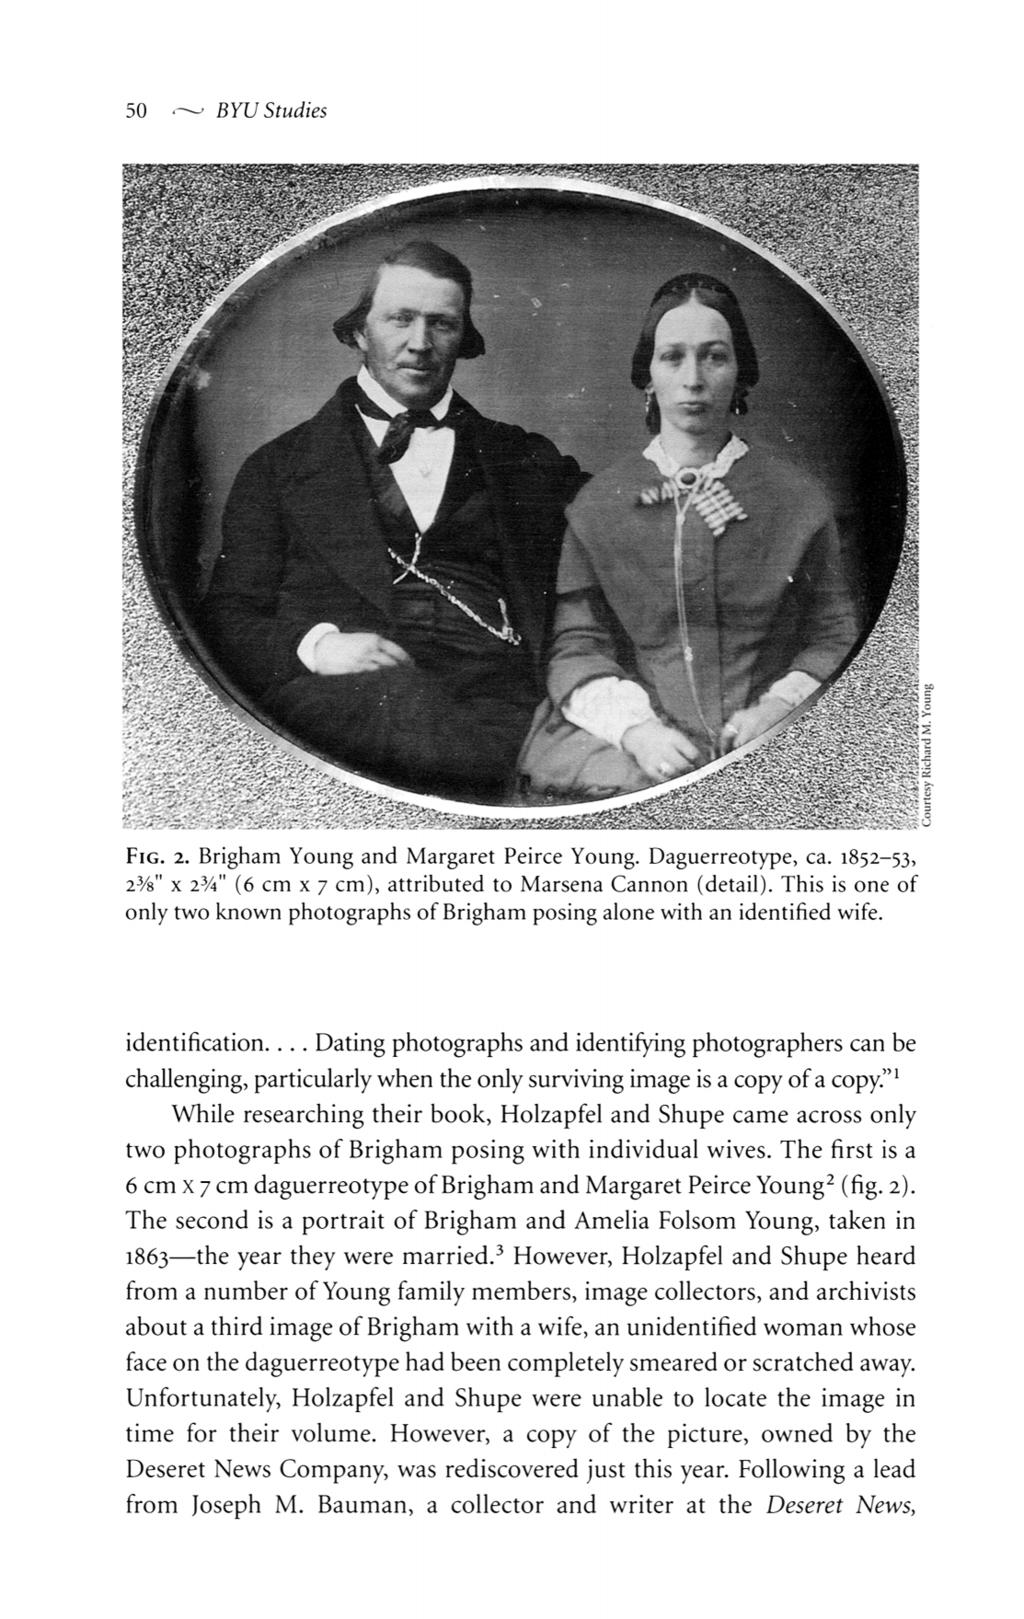 Holzapfel and Schwartz: A Mysterious Image: Brigham Young with an Unknown Wife 50 byustudies BYU studies xyyvvy FIG 2 brigham young and margaret peirce young daguerreotype ca 1852 53 238 x 234 6 cm x